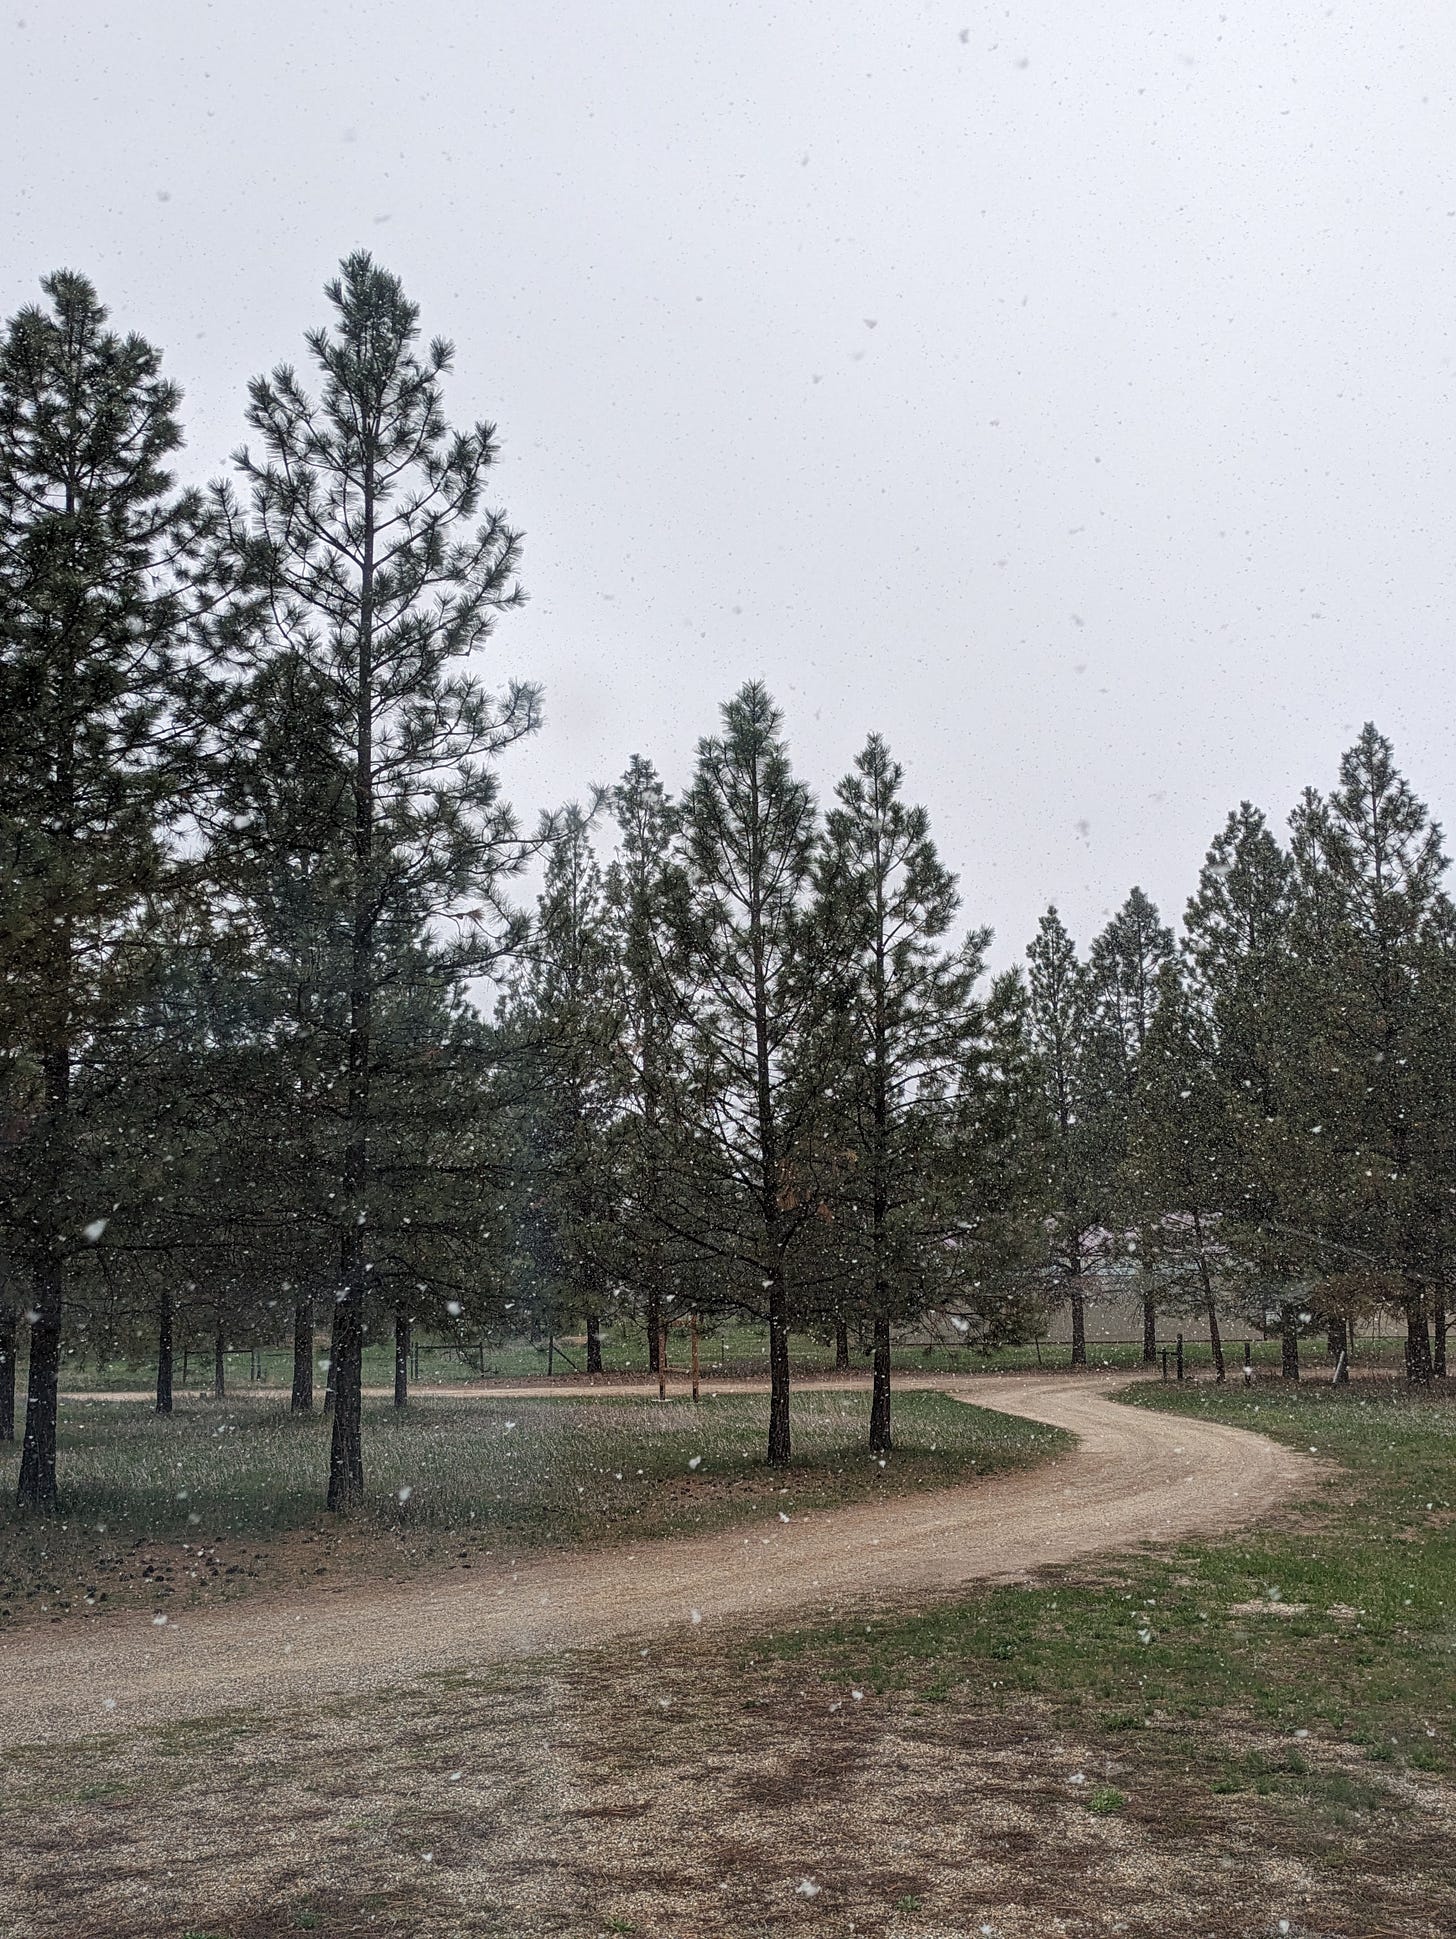 a rural scene of tall pine trees against a plain white sky, with large snowflakes falling onto the green grass and brown dirt road